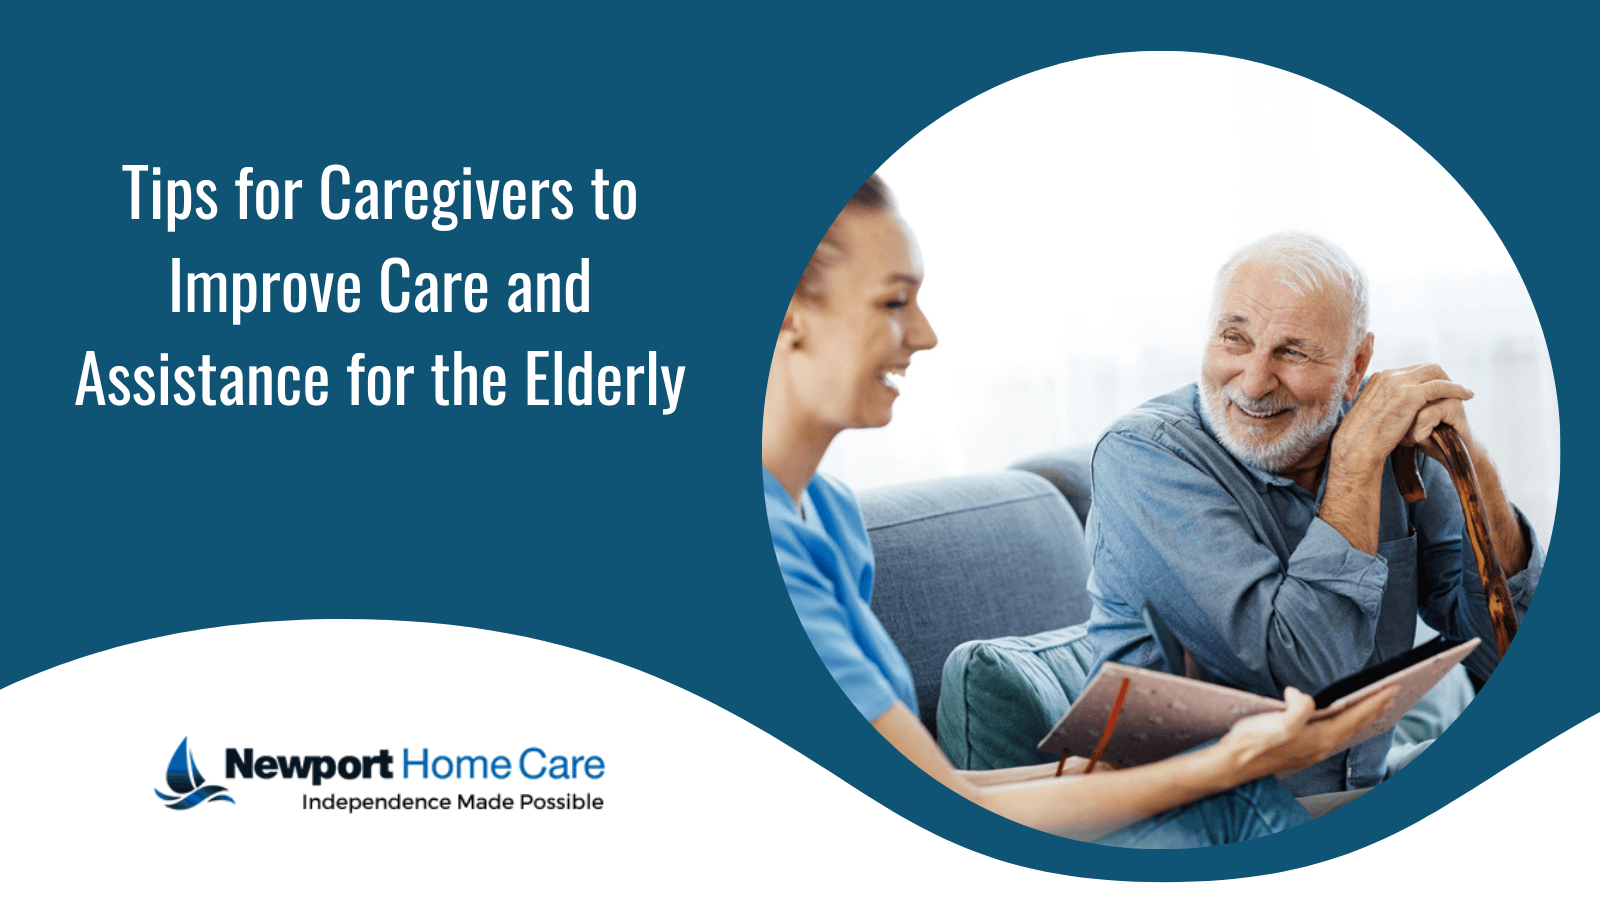 Tips for Caregivers to Improve Care and Assistance for the Elderly